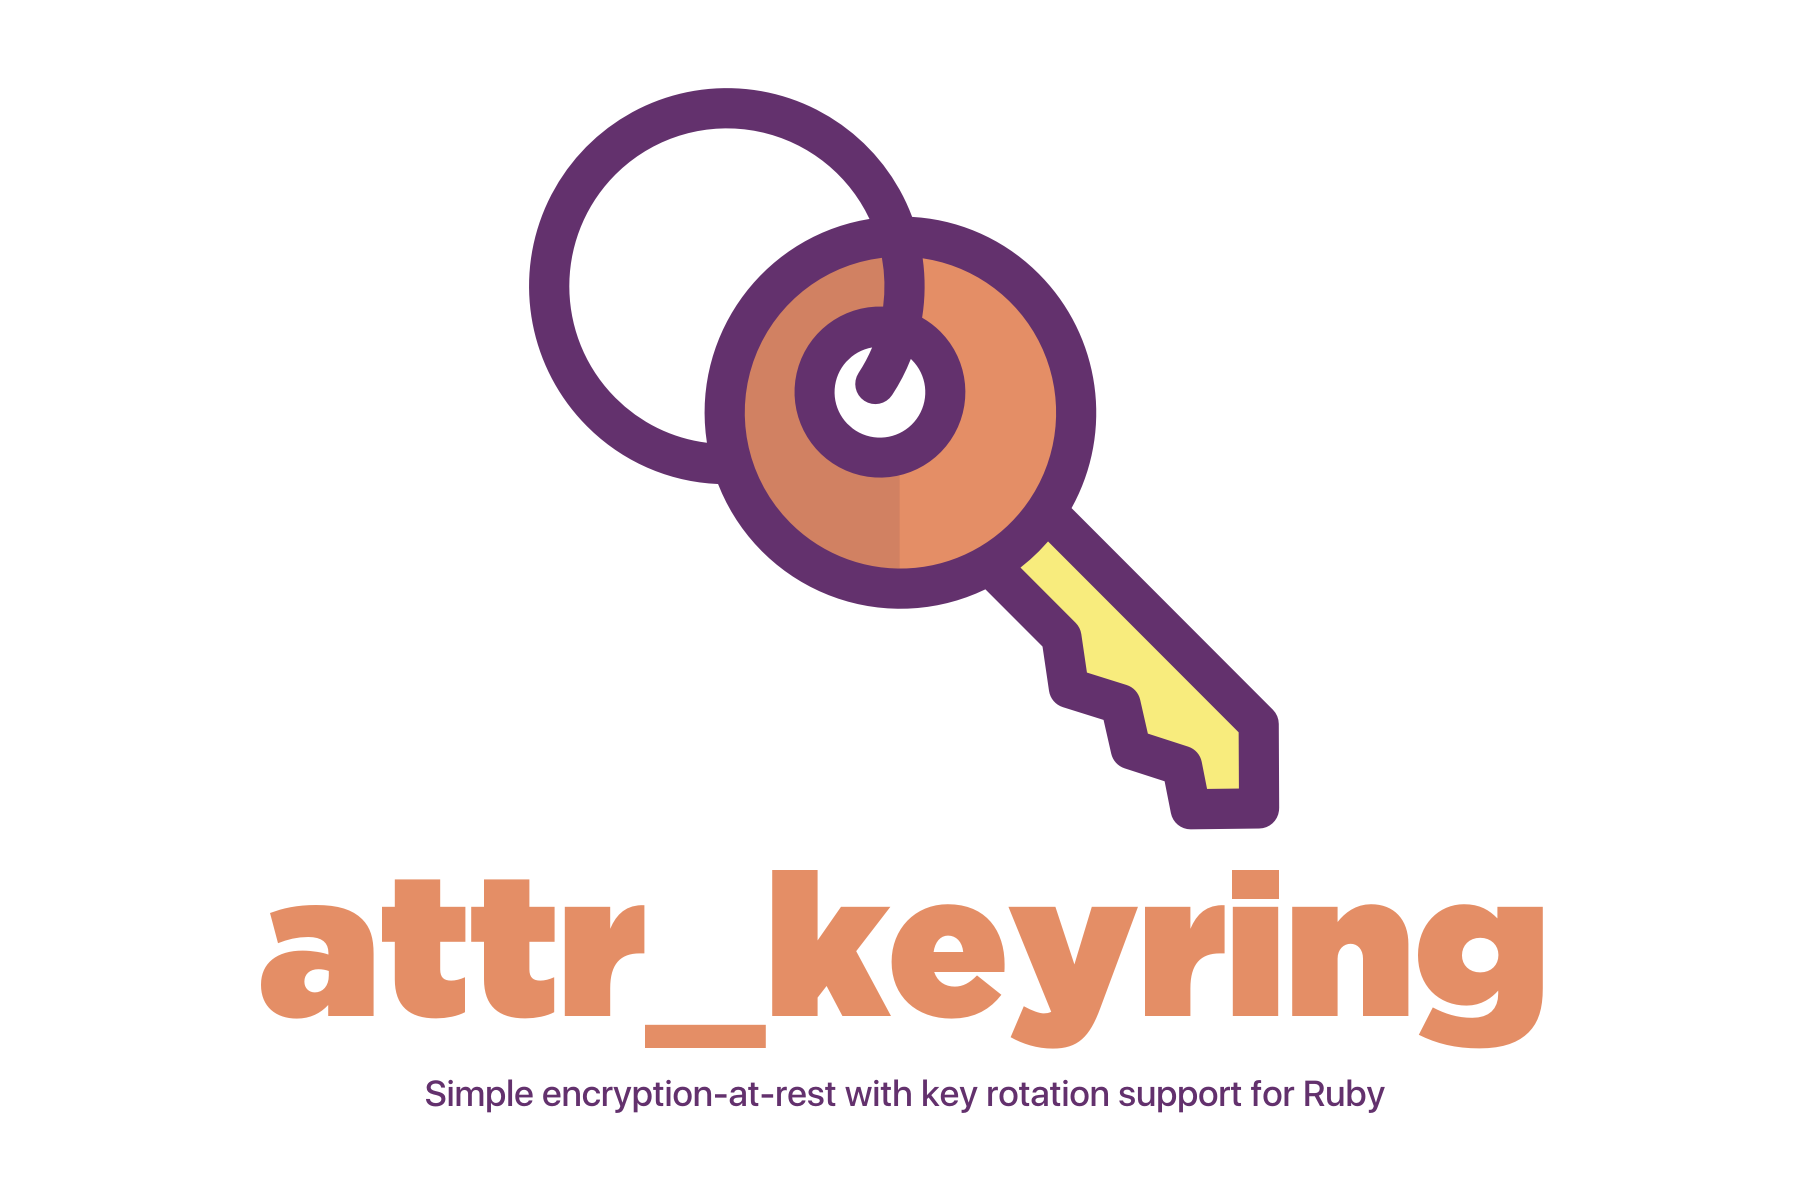 attr_keyring: Simple encryption-at-rest with key rotation support for Ruby.